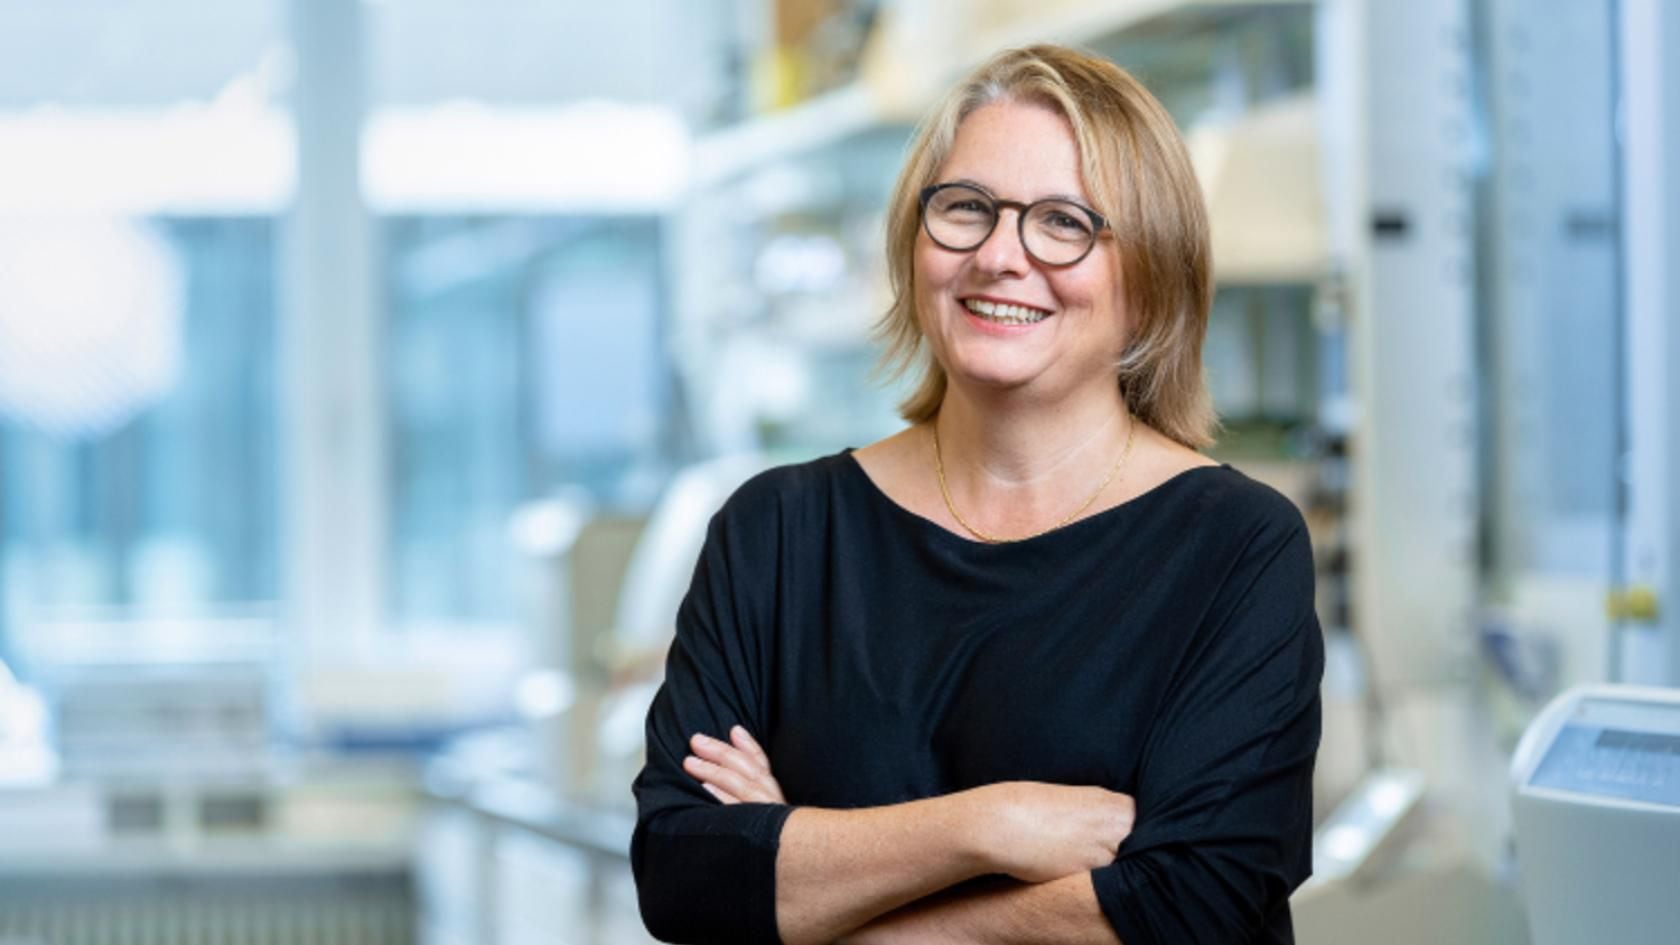 Alexandra Trkola, Professor of Medical Virology at the University of Zurich, has been awarded a 3-year grant (INV-061559) from the Bill & Melinda Gates Foundation for the project “RENEW clinical studies in people with HIV”. Together